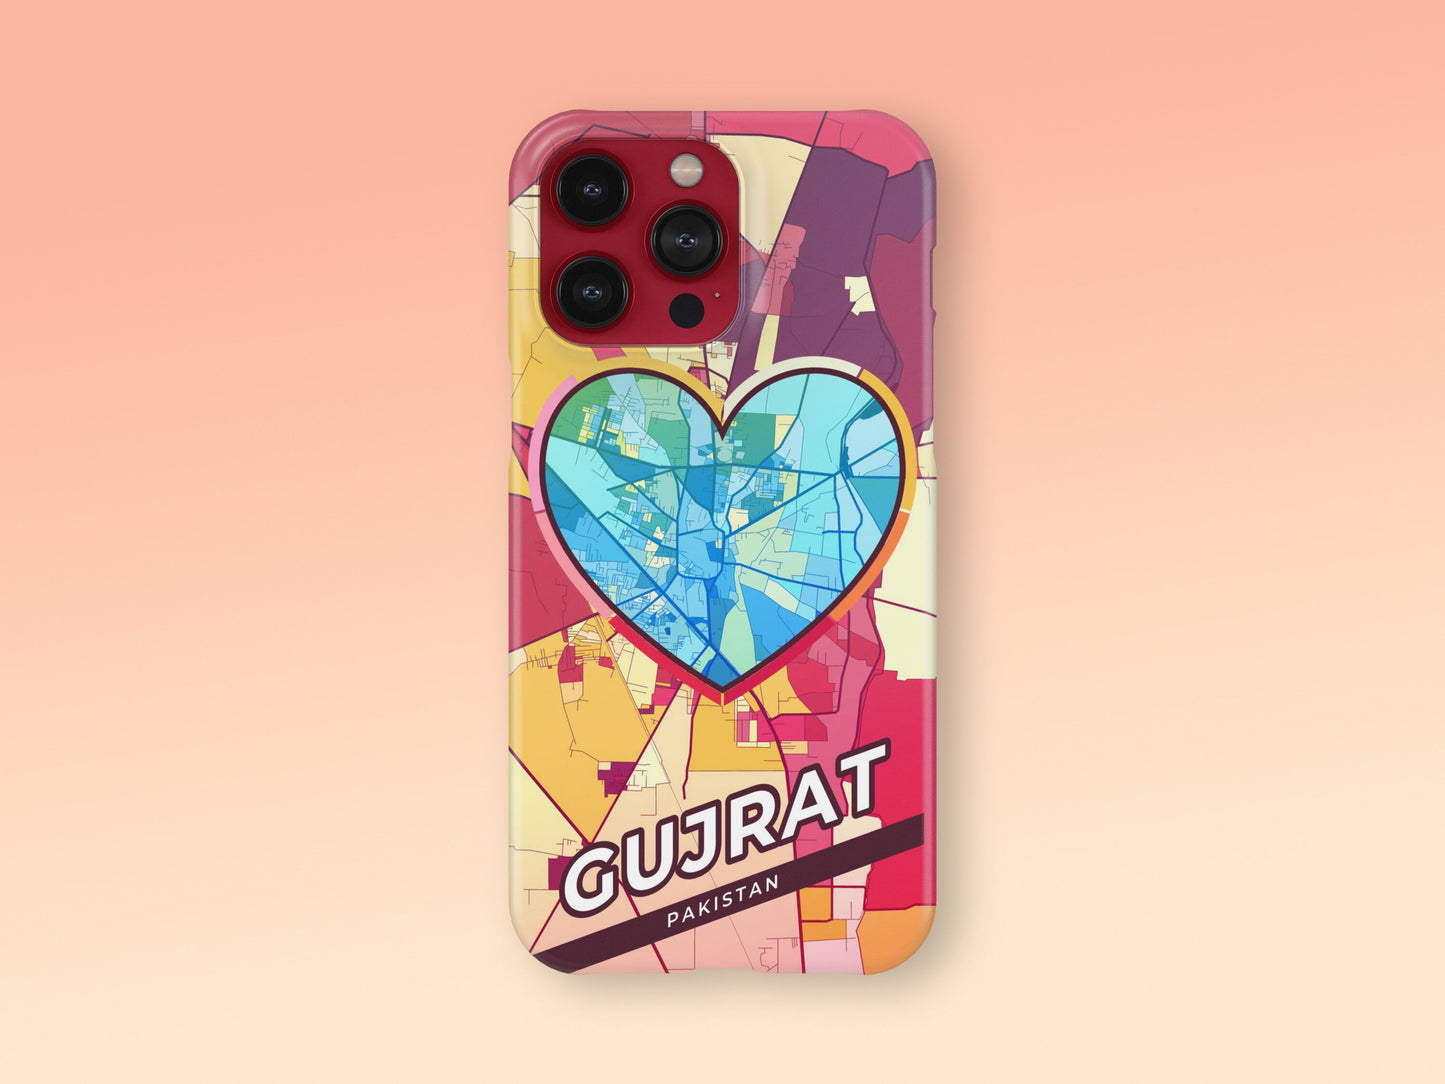 Gujrat Pakistan slim phone case with colorful icon. Birthday, wedding or housewarming gift. Couple match cases. 2